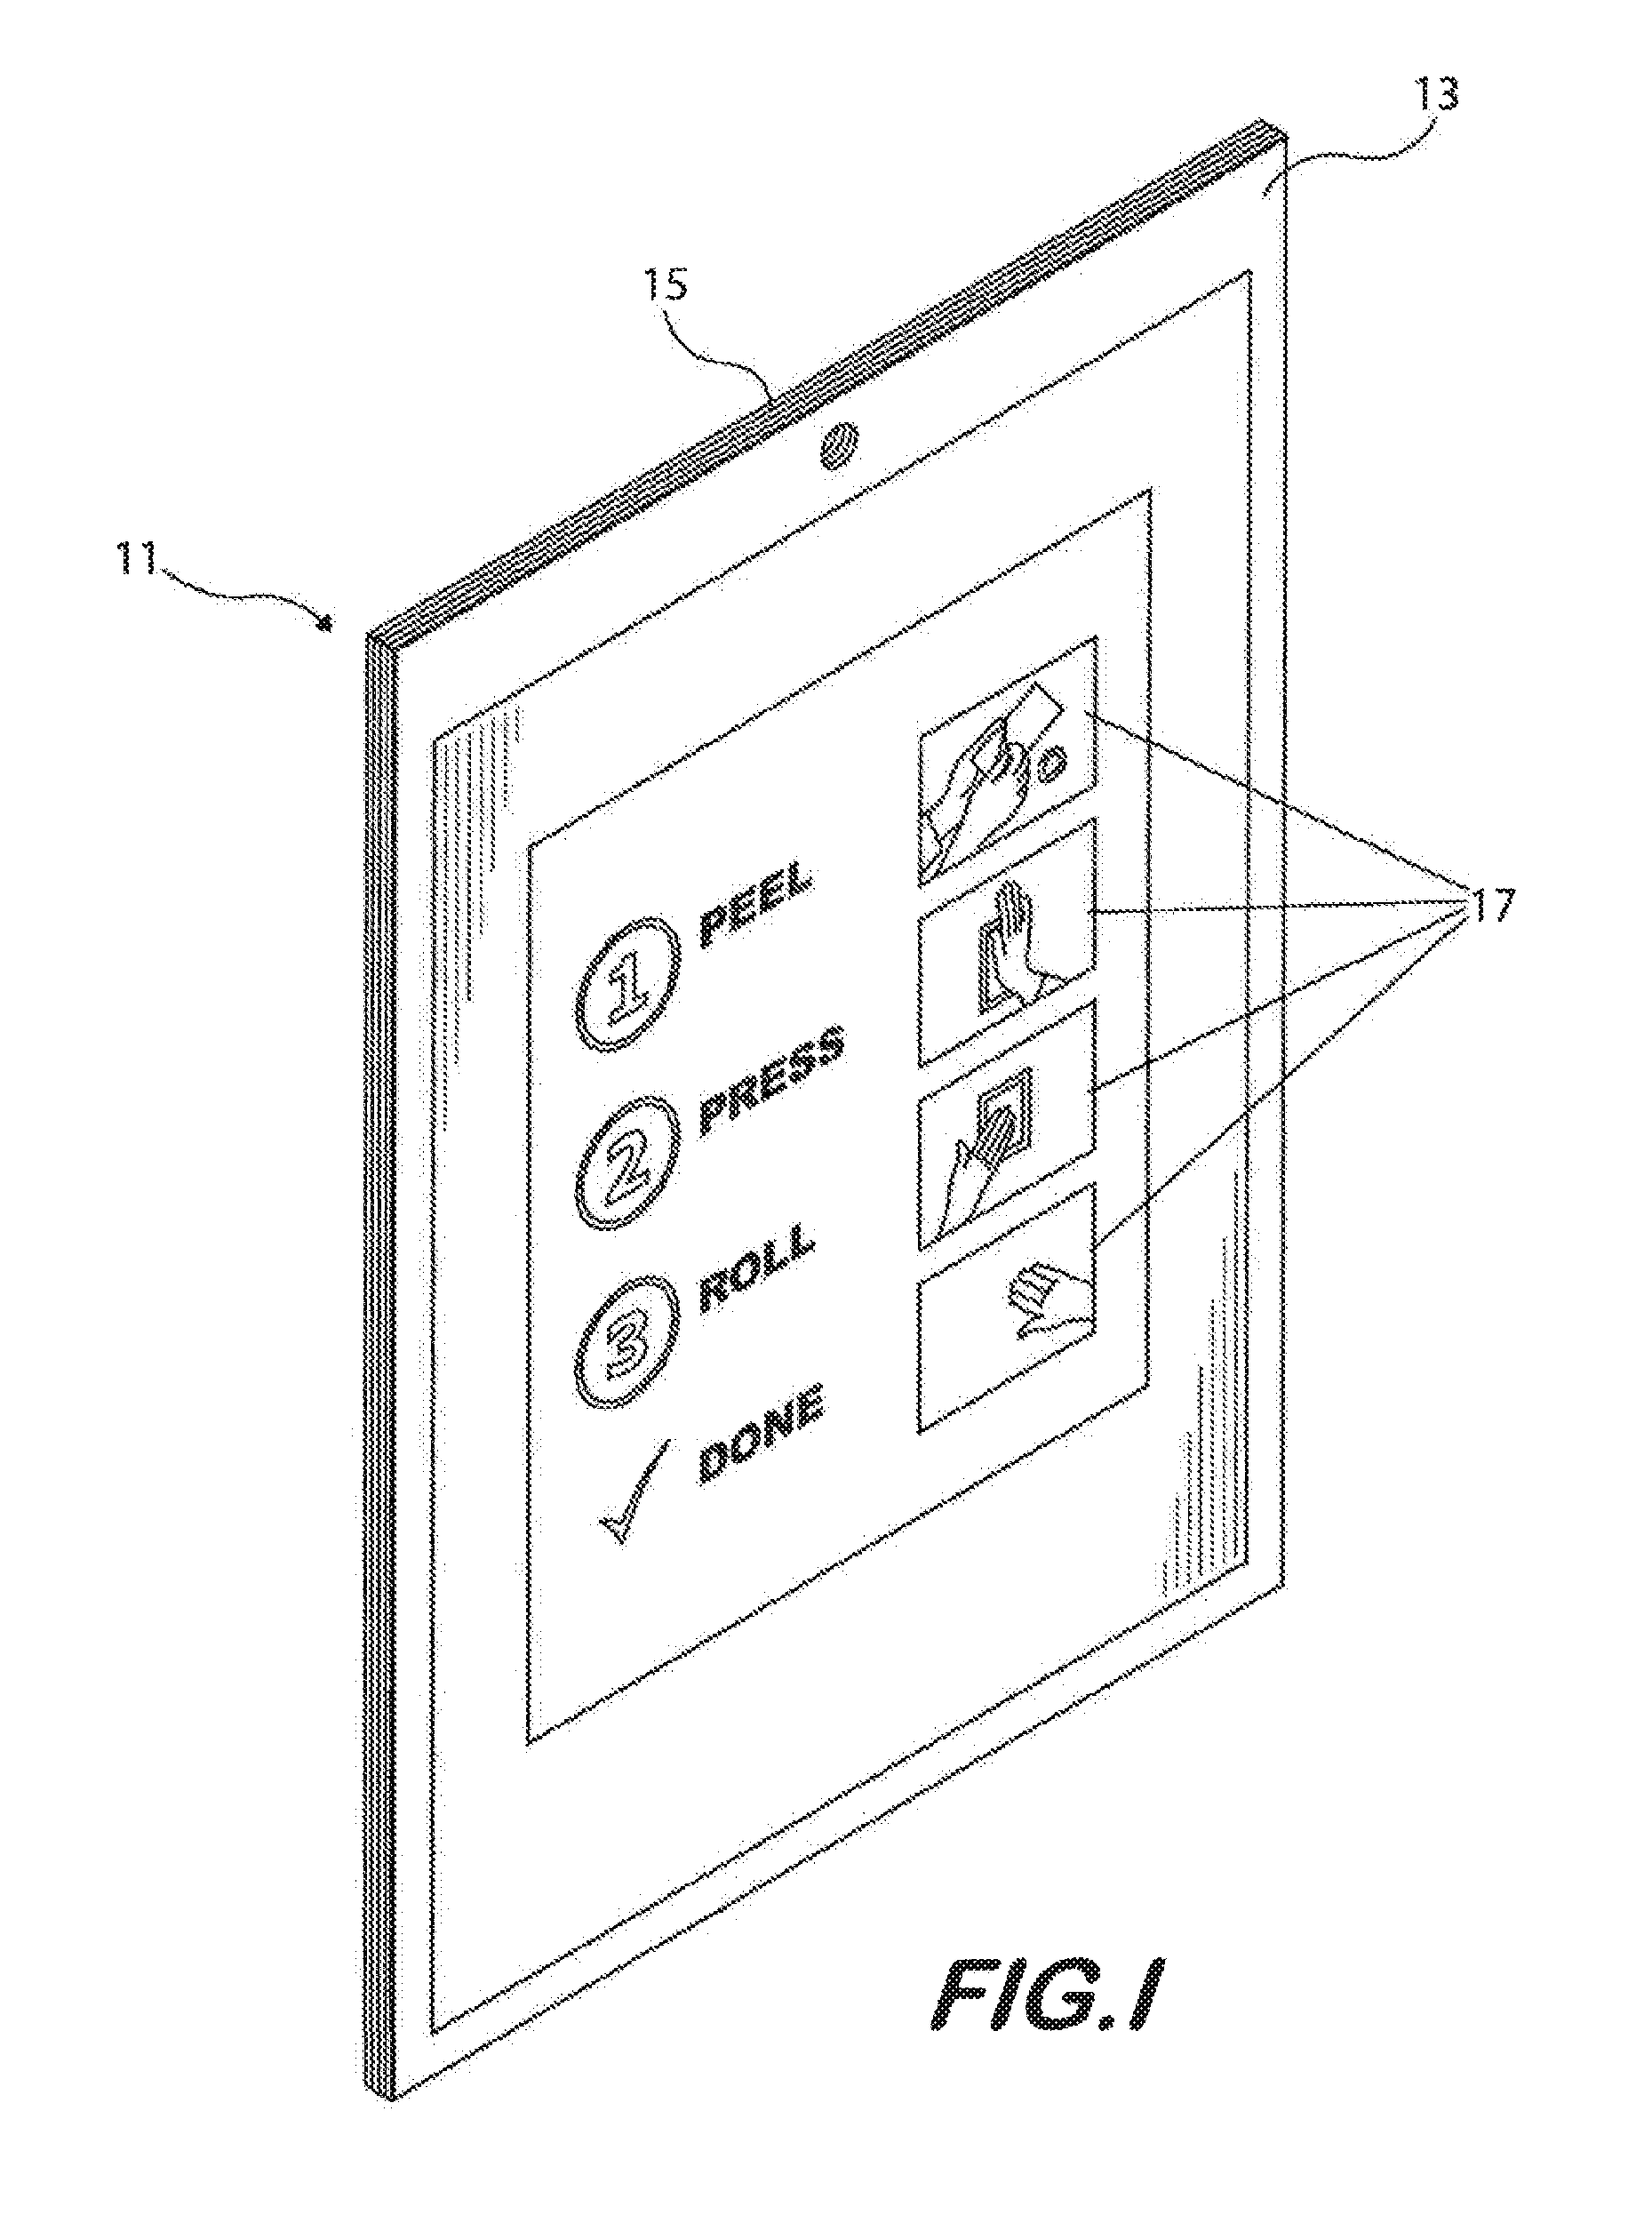 Systems and methods for patching and repairing wall board